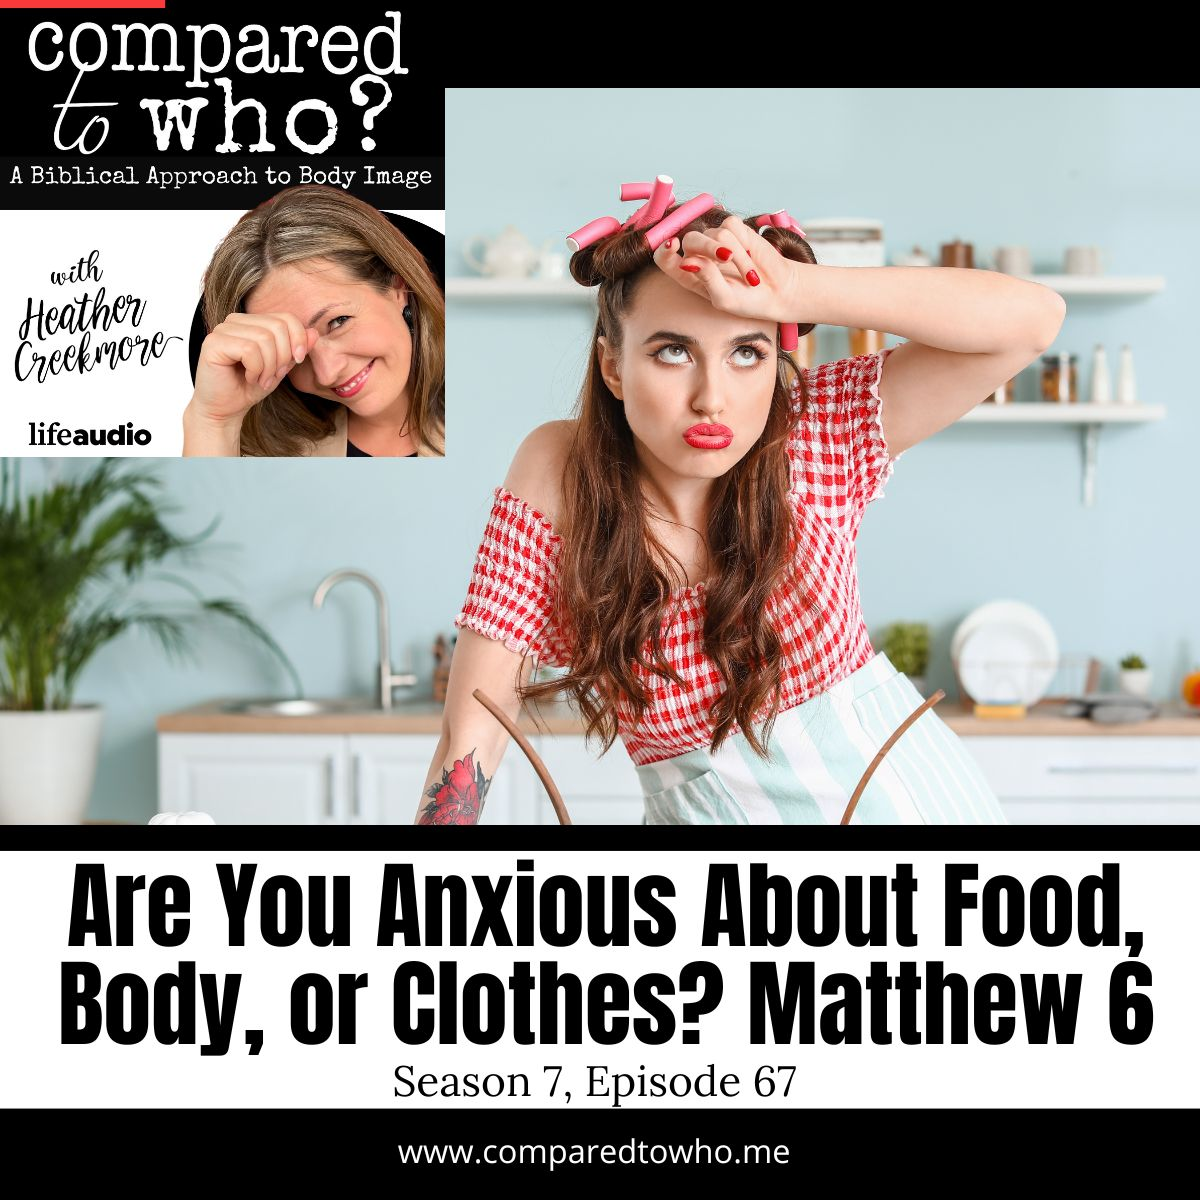 Are You Anxious About Food, Clothes, and Body? Matthew 6